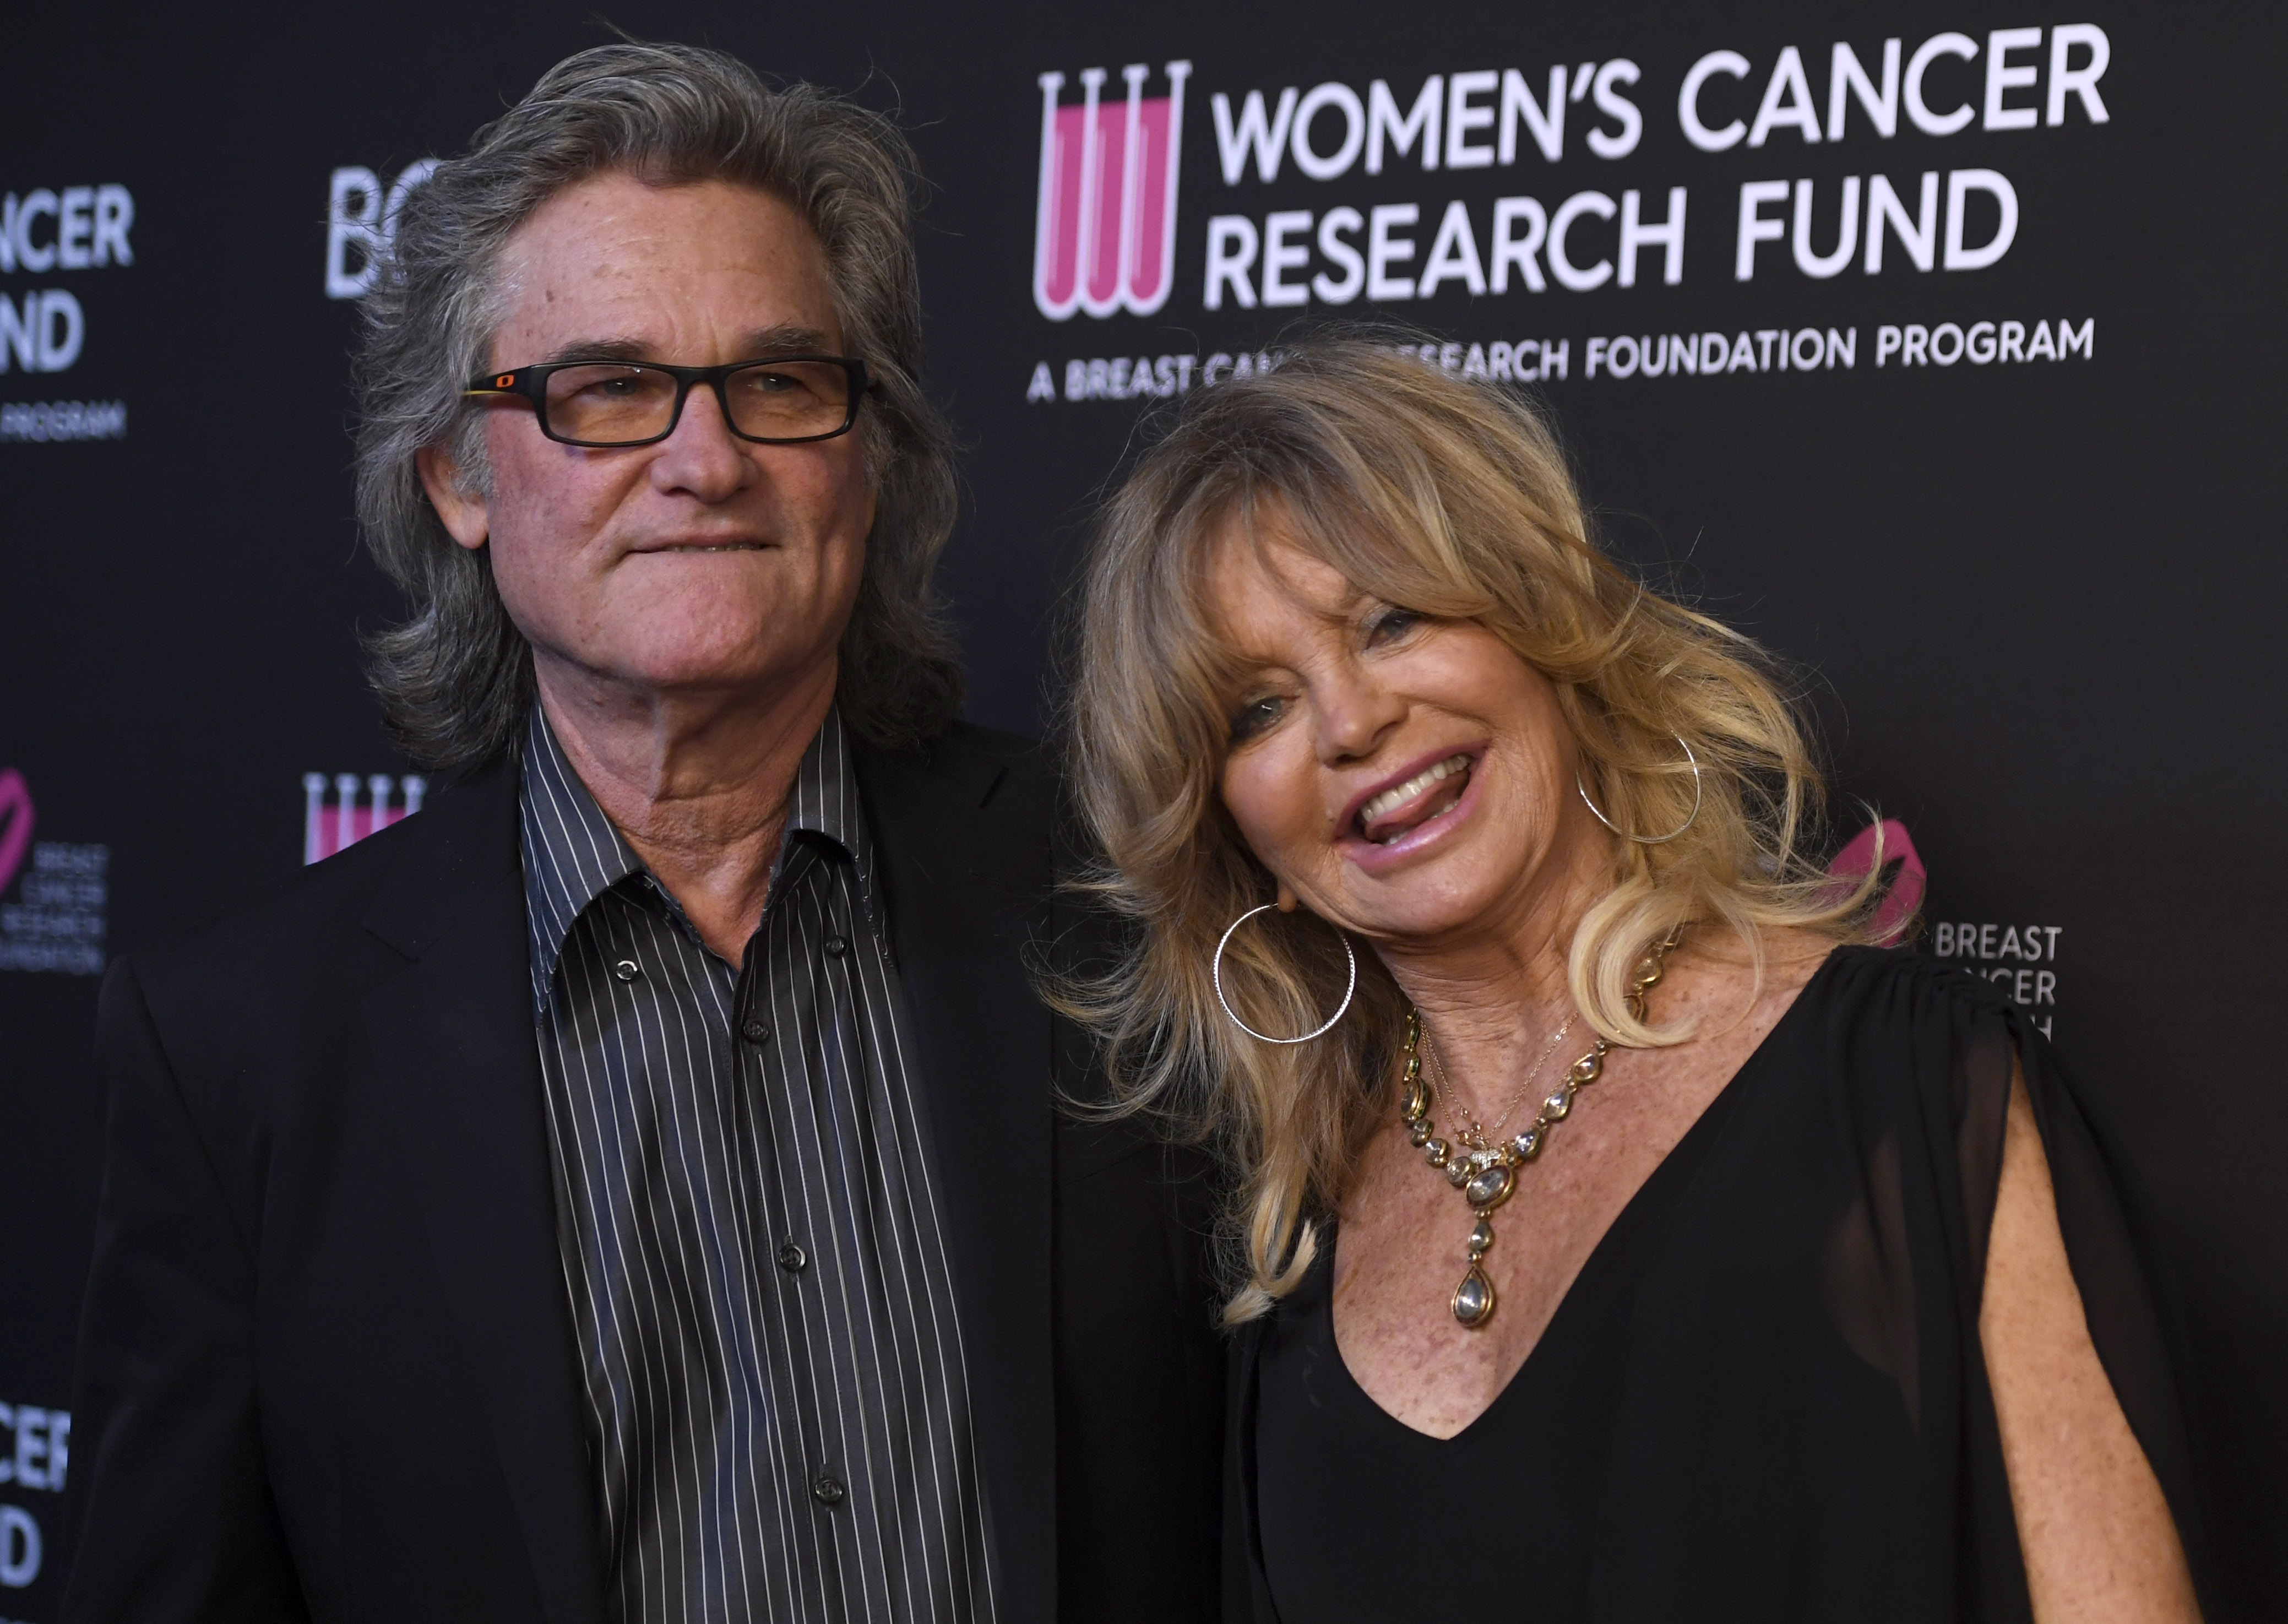 Kurt Russell and Goldie Hawn attend The Women's Cancer Research Fund's Benefit Gala in Beverly Hills on February 28, 2019. | Source: Getty Images